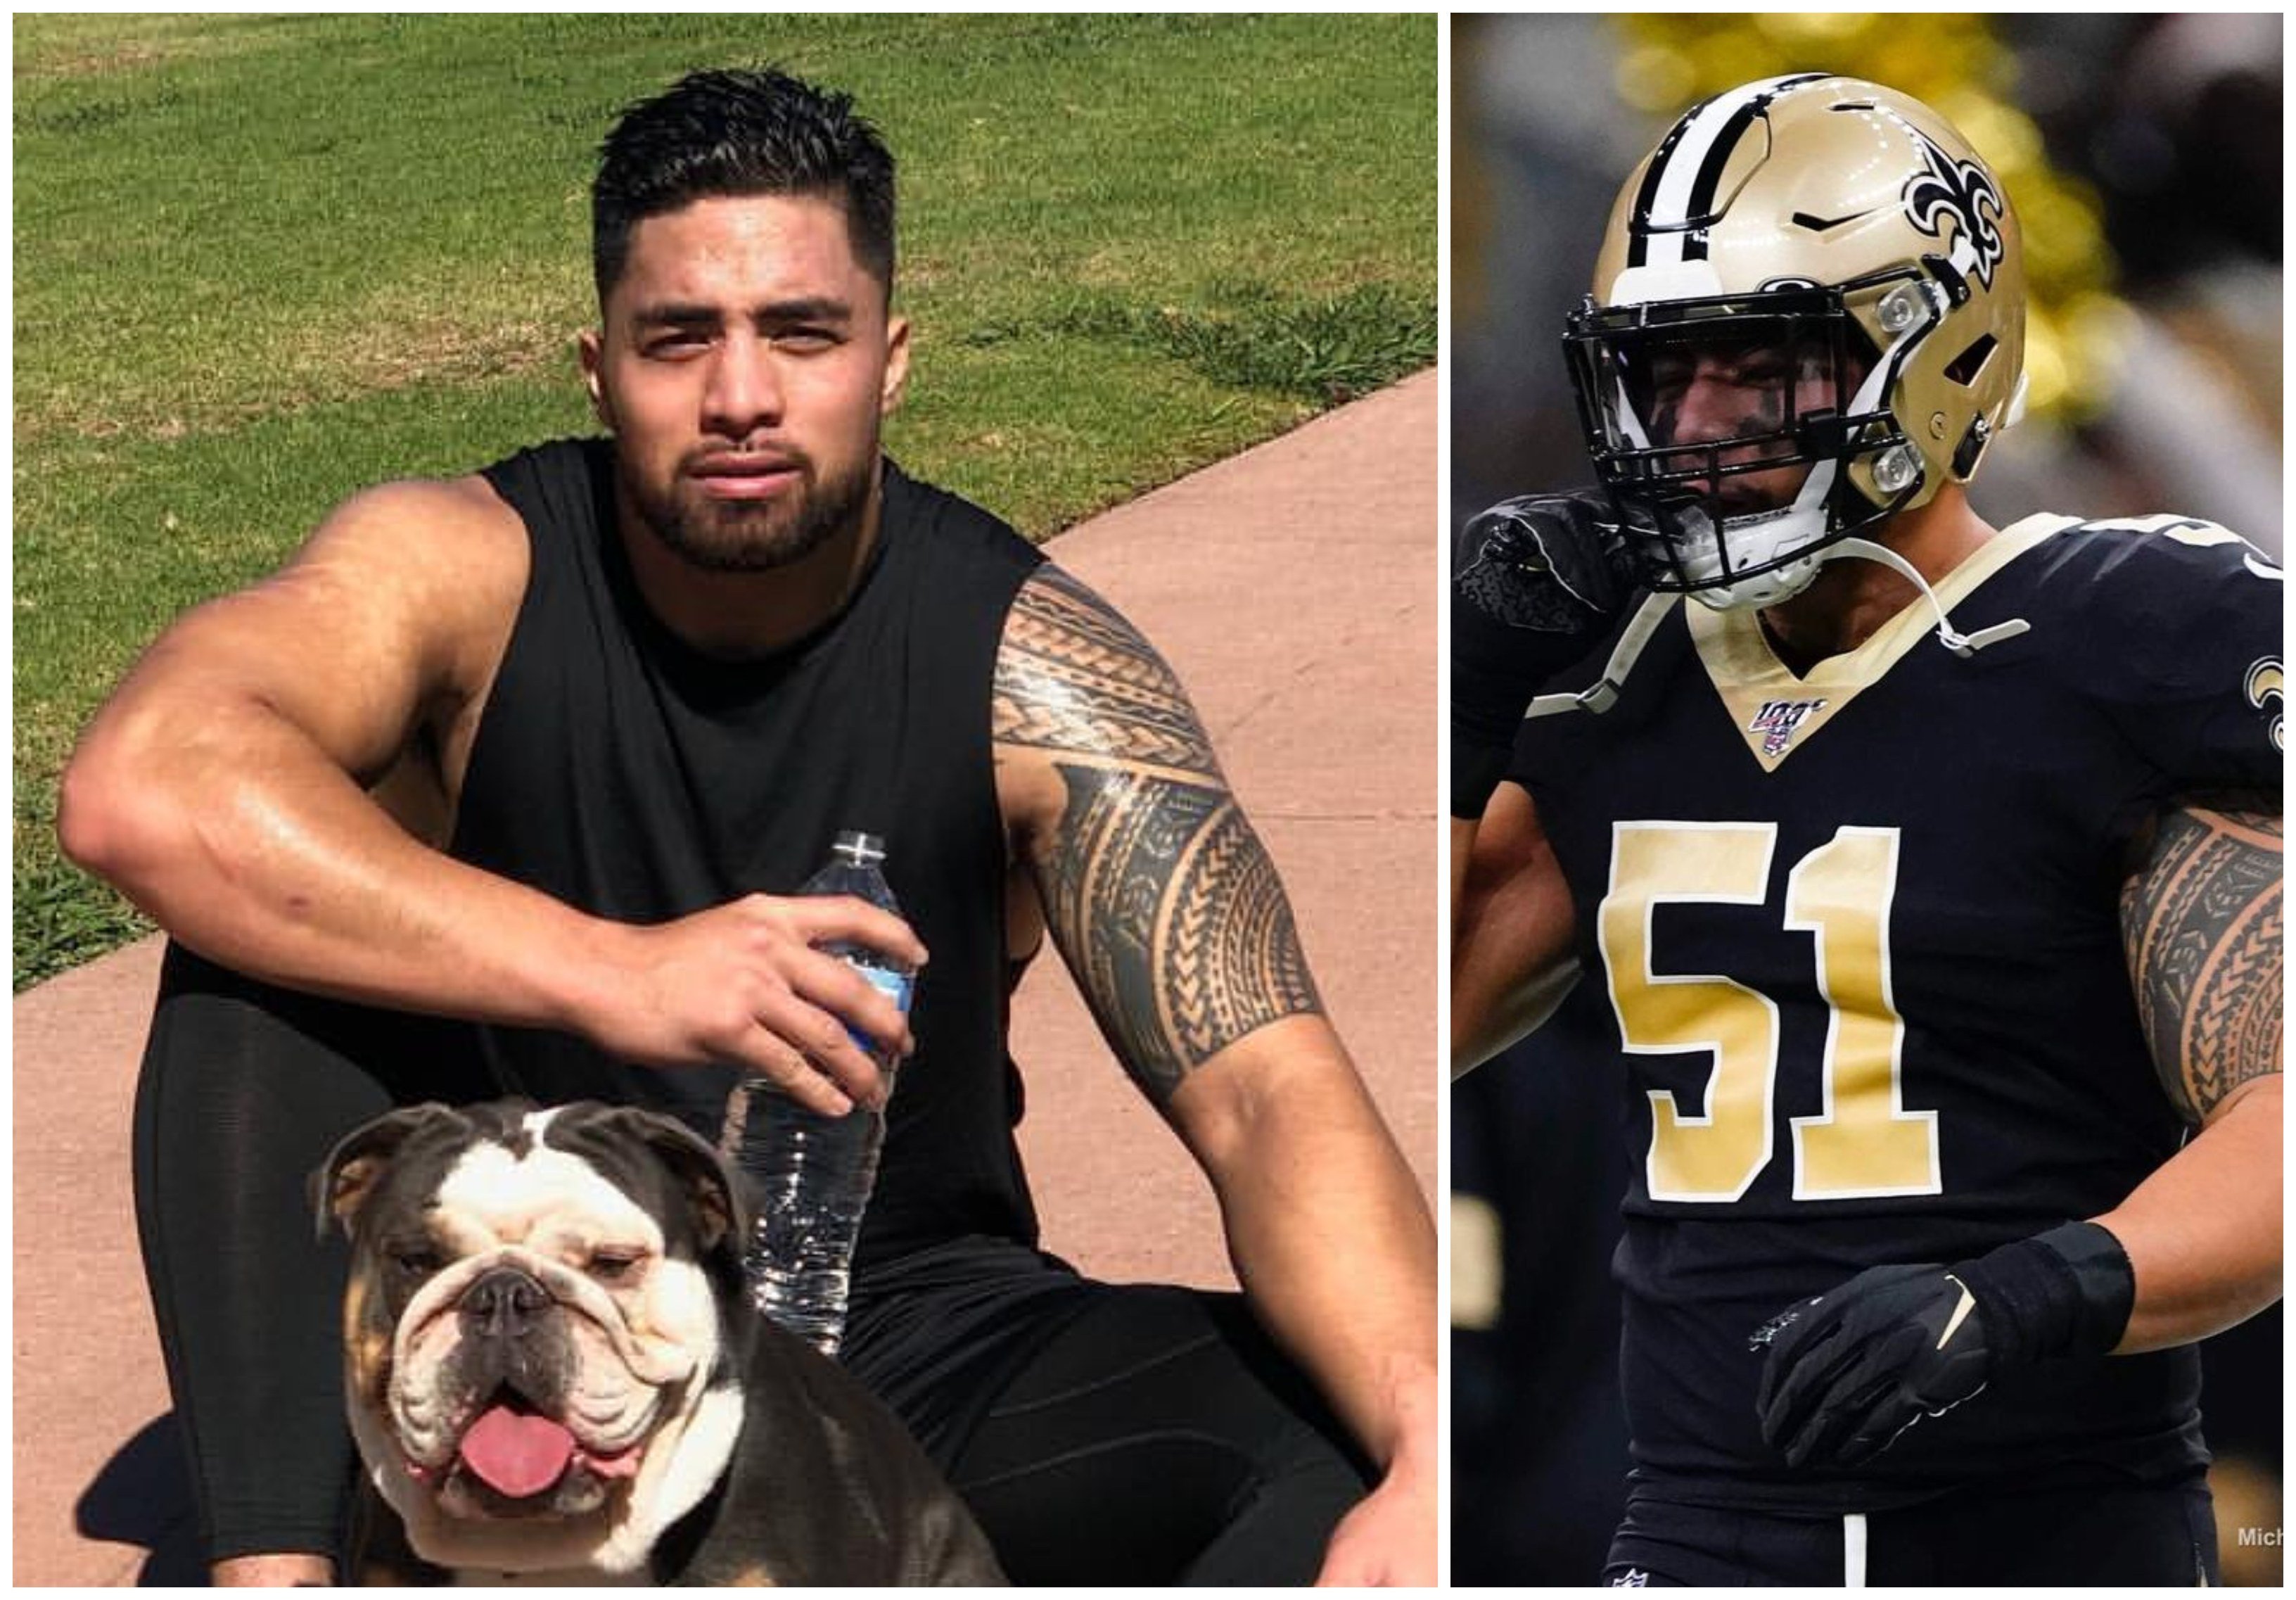 The NFL’s Manti Te’o suffered his fair share of heartbreak when he got catfished – but now he’s finally getting closure, sharing his side of the story in Netflix’s Untold documentary series. Photos: @mteo50/Instagram